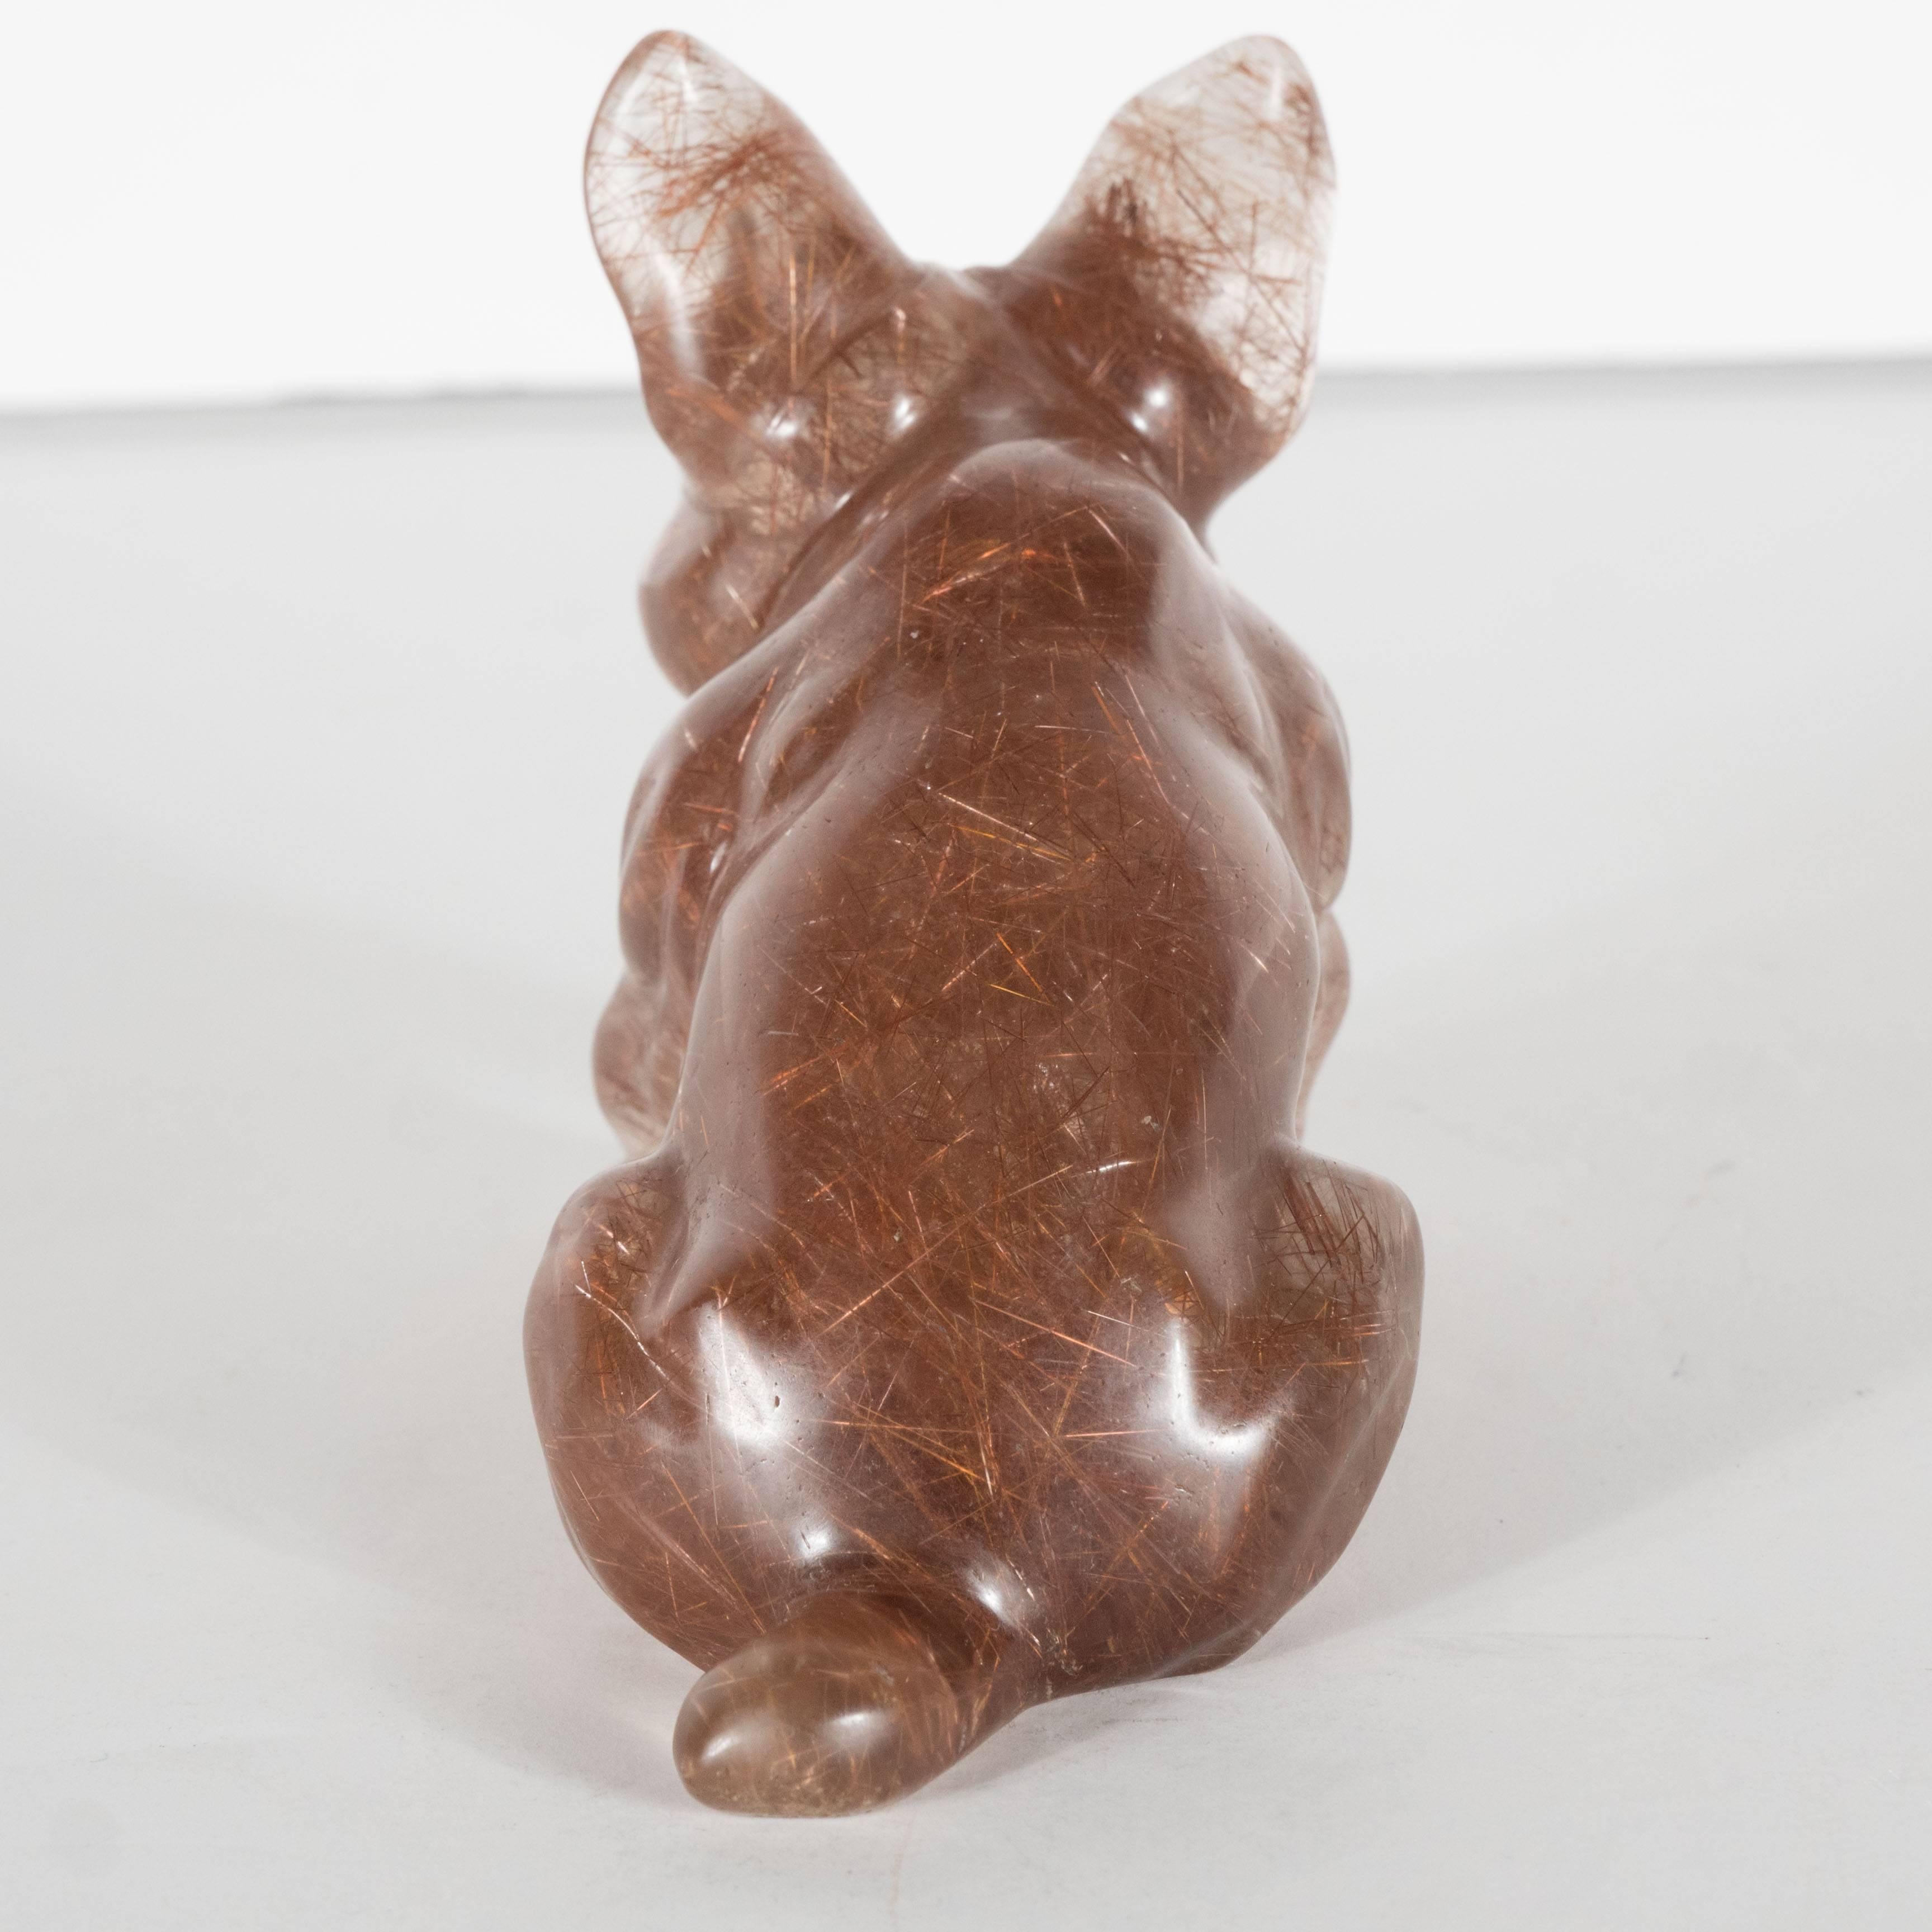 Carved  Smokey Quartz Objet D'Art or Paperweight of a Seated Dog by Marshak, Paris